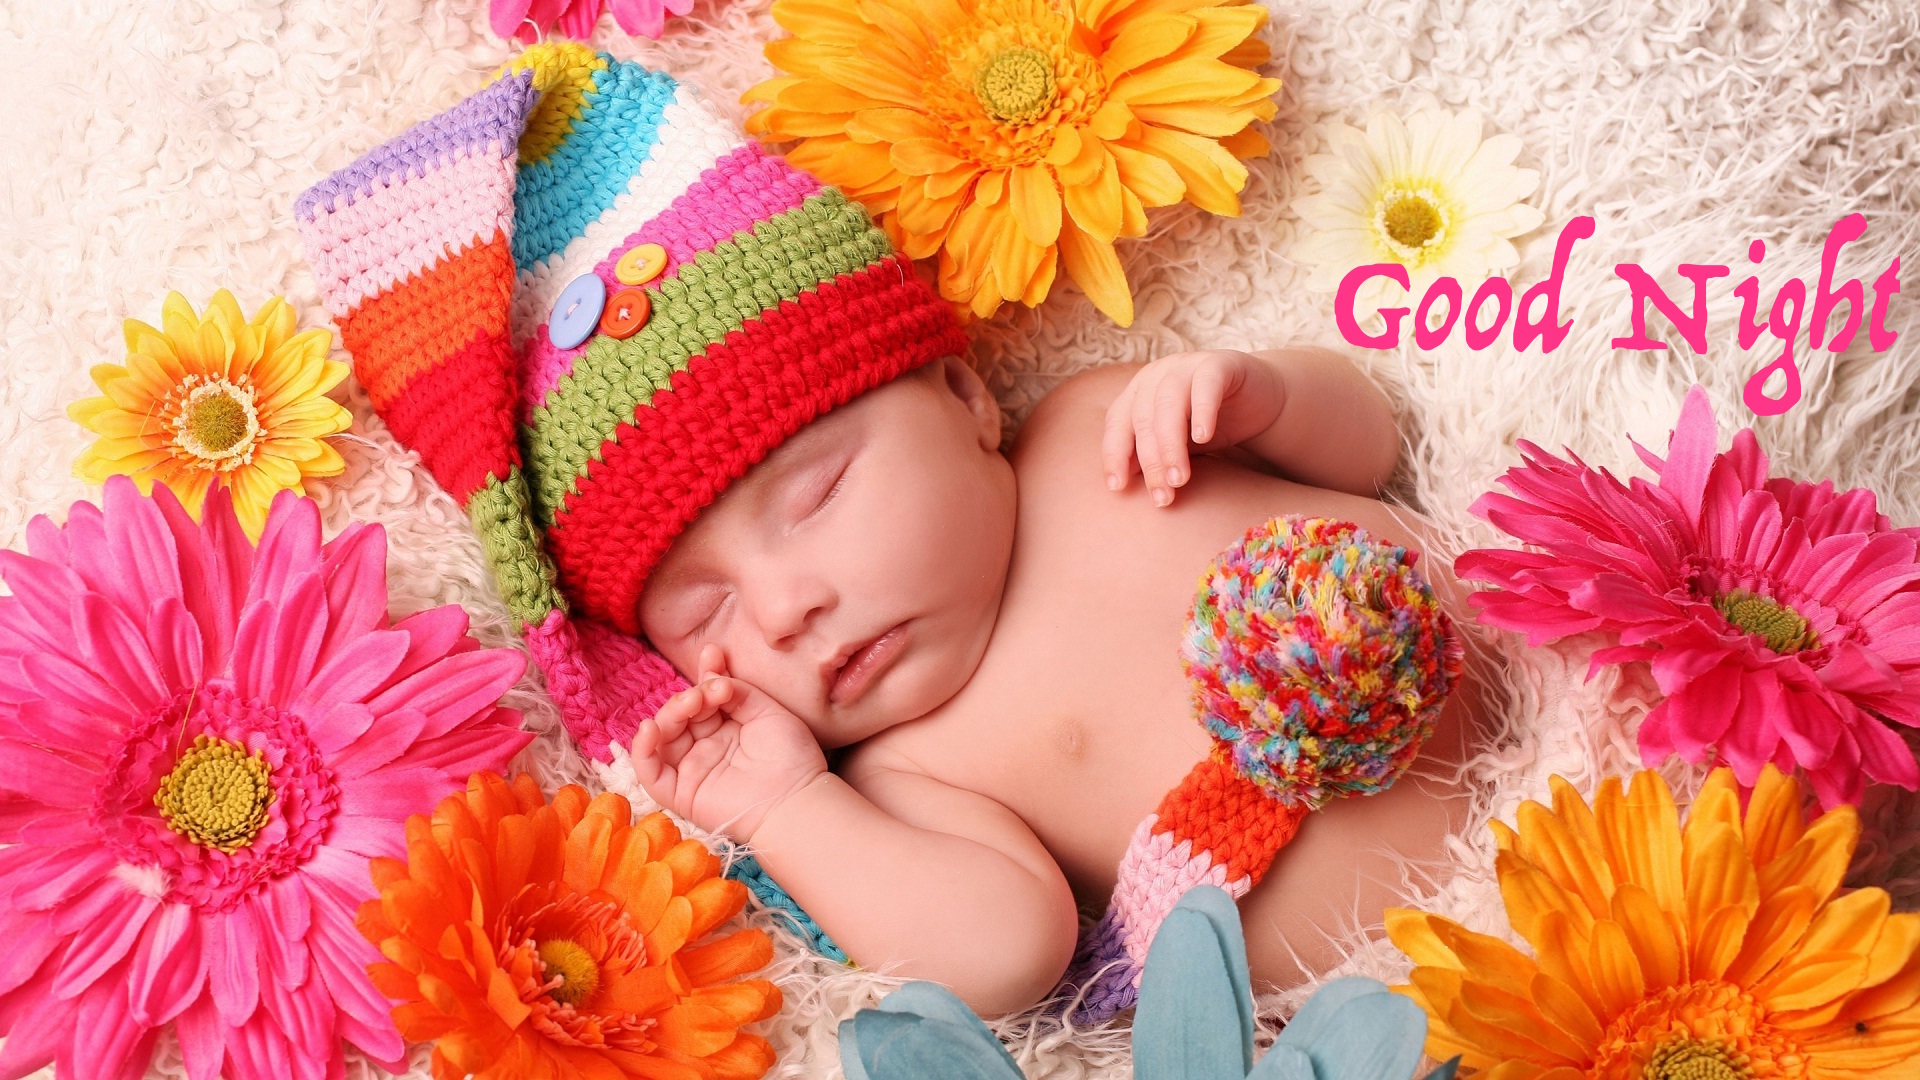 Good Night Baby Flowers Bed Image - Hd Flowers Good Night , HD Wallpaper & Backgrounds